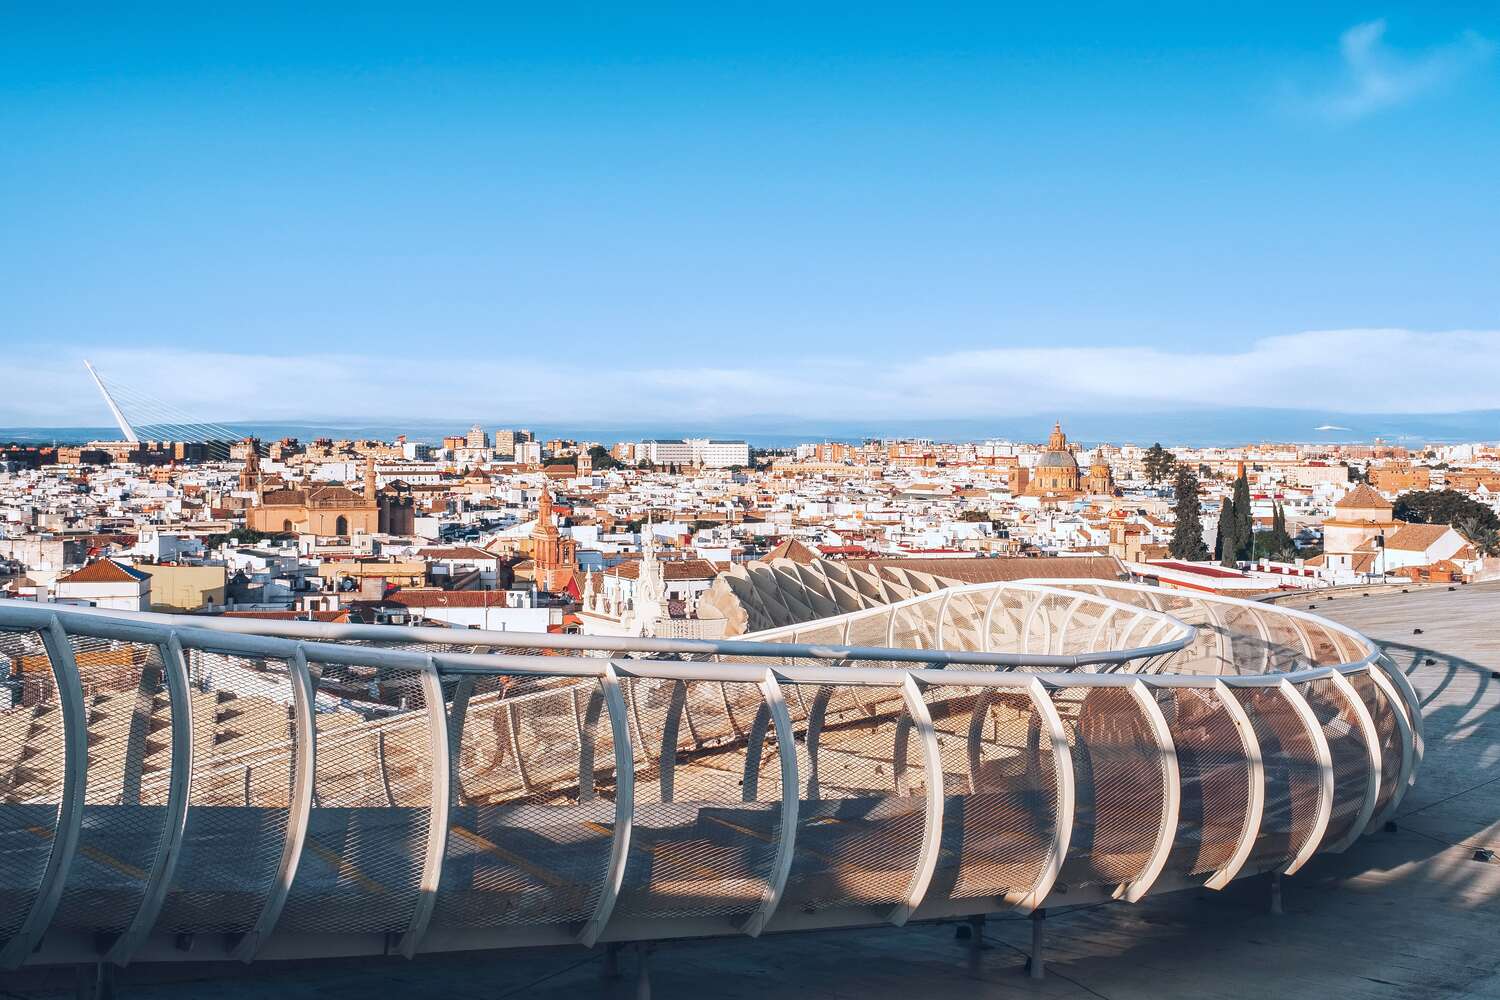 Views at the top of the Metropol Parasol in Seville